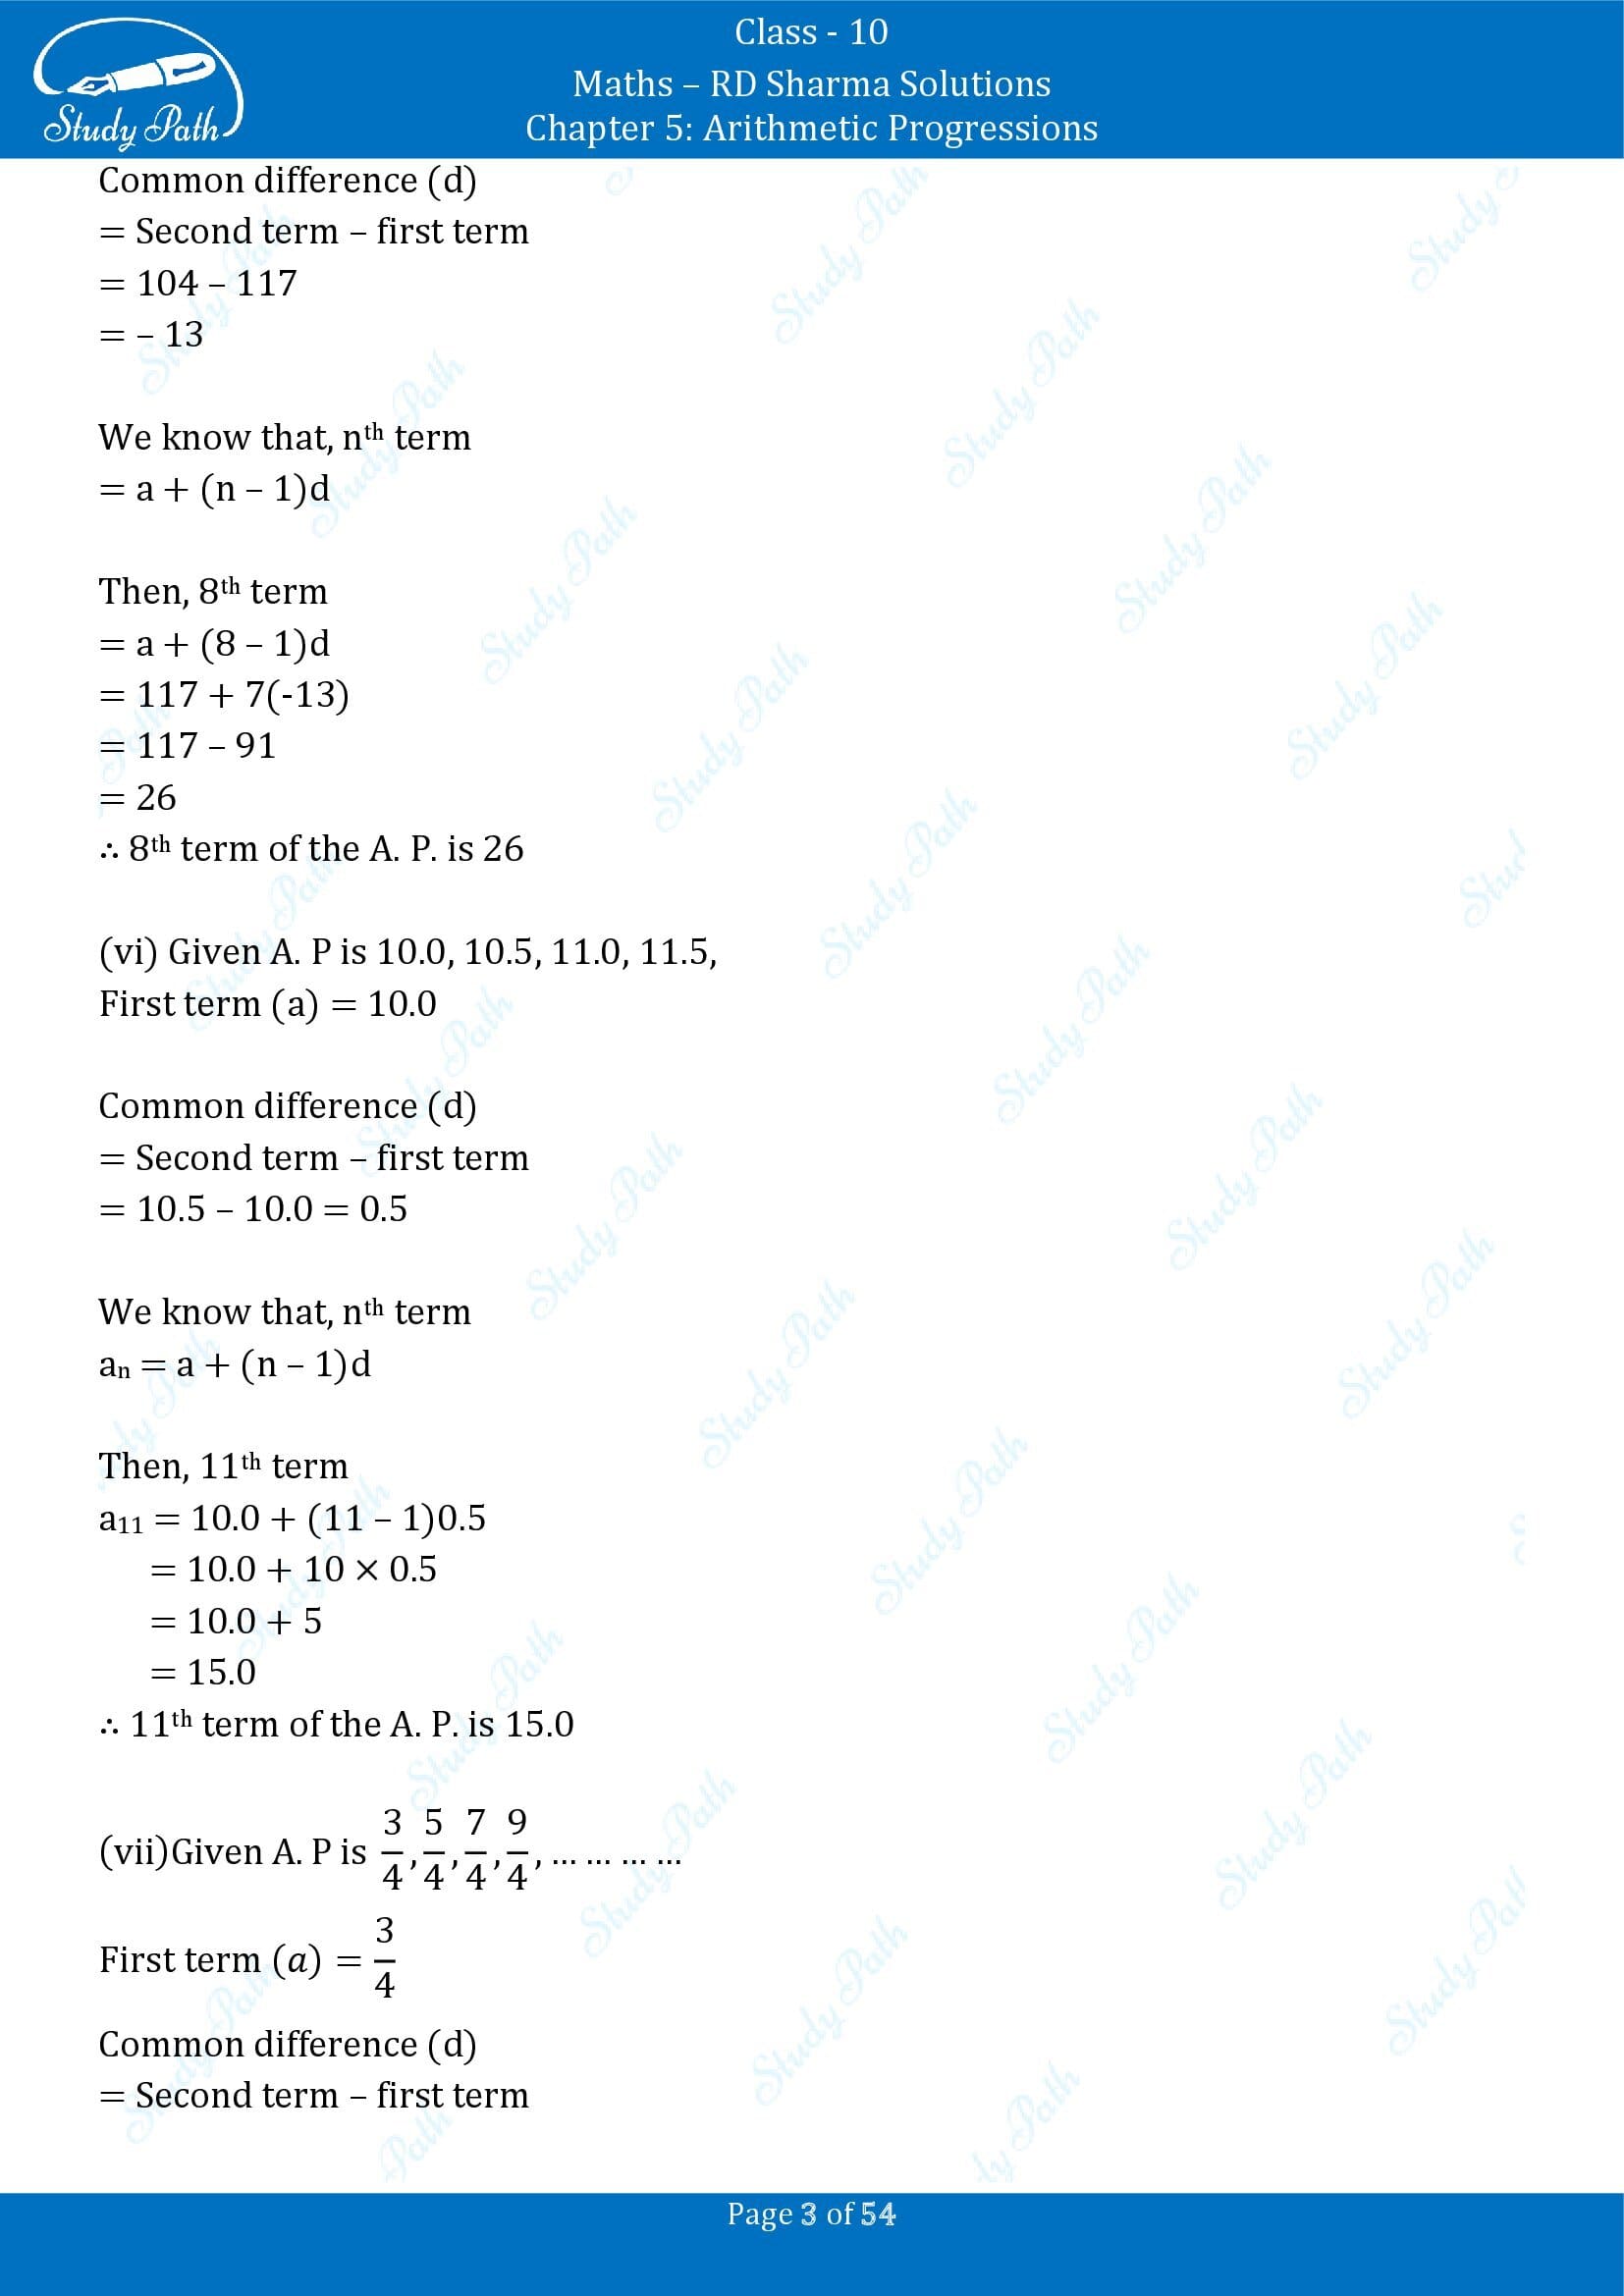 RD Sharma Solutions Class 10 Chapter 5 Arithmetic Progressions Exercise 5.4 00003